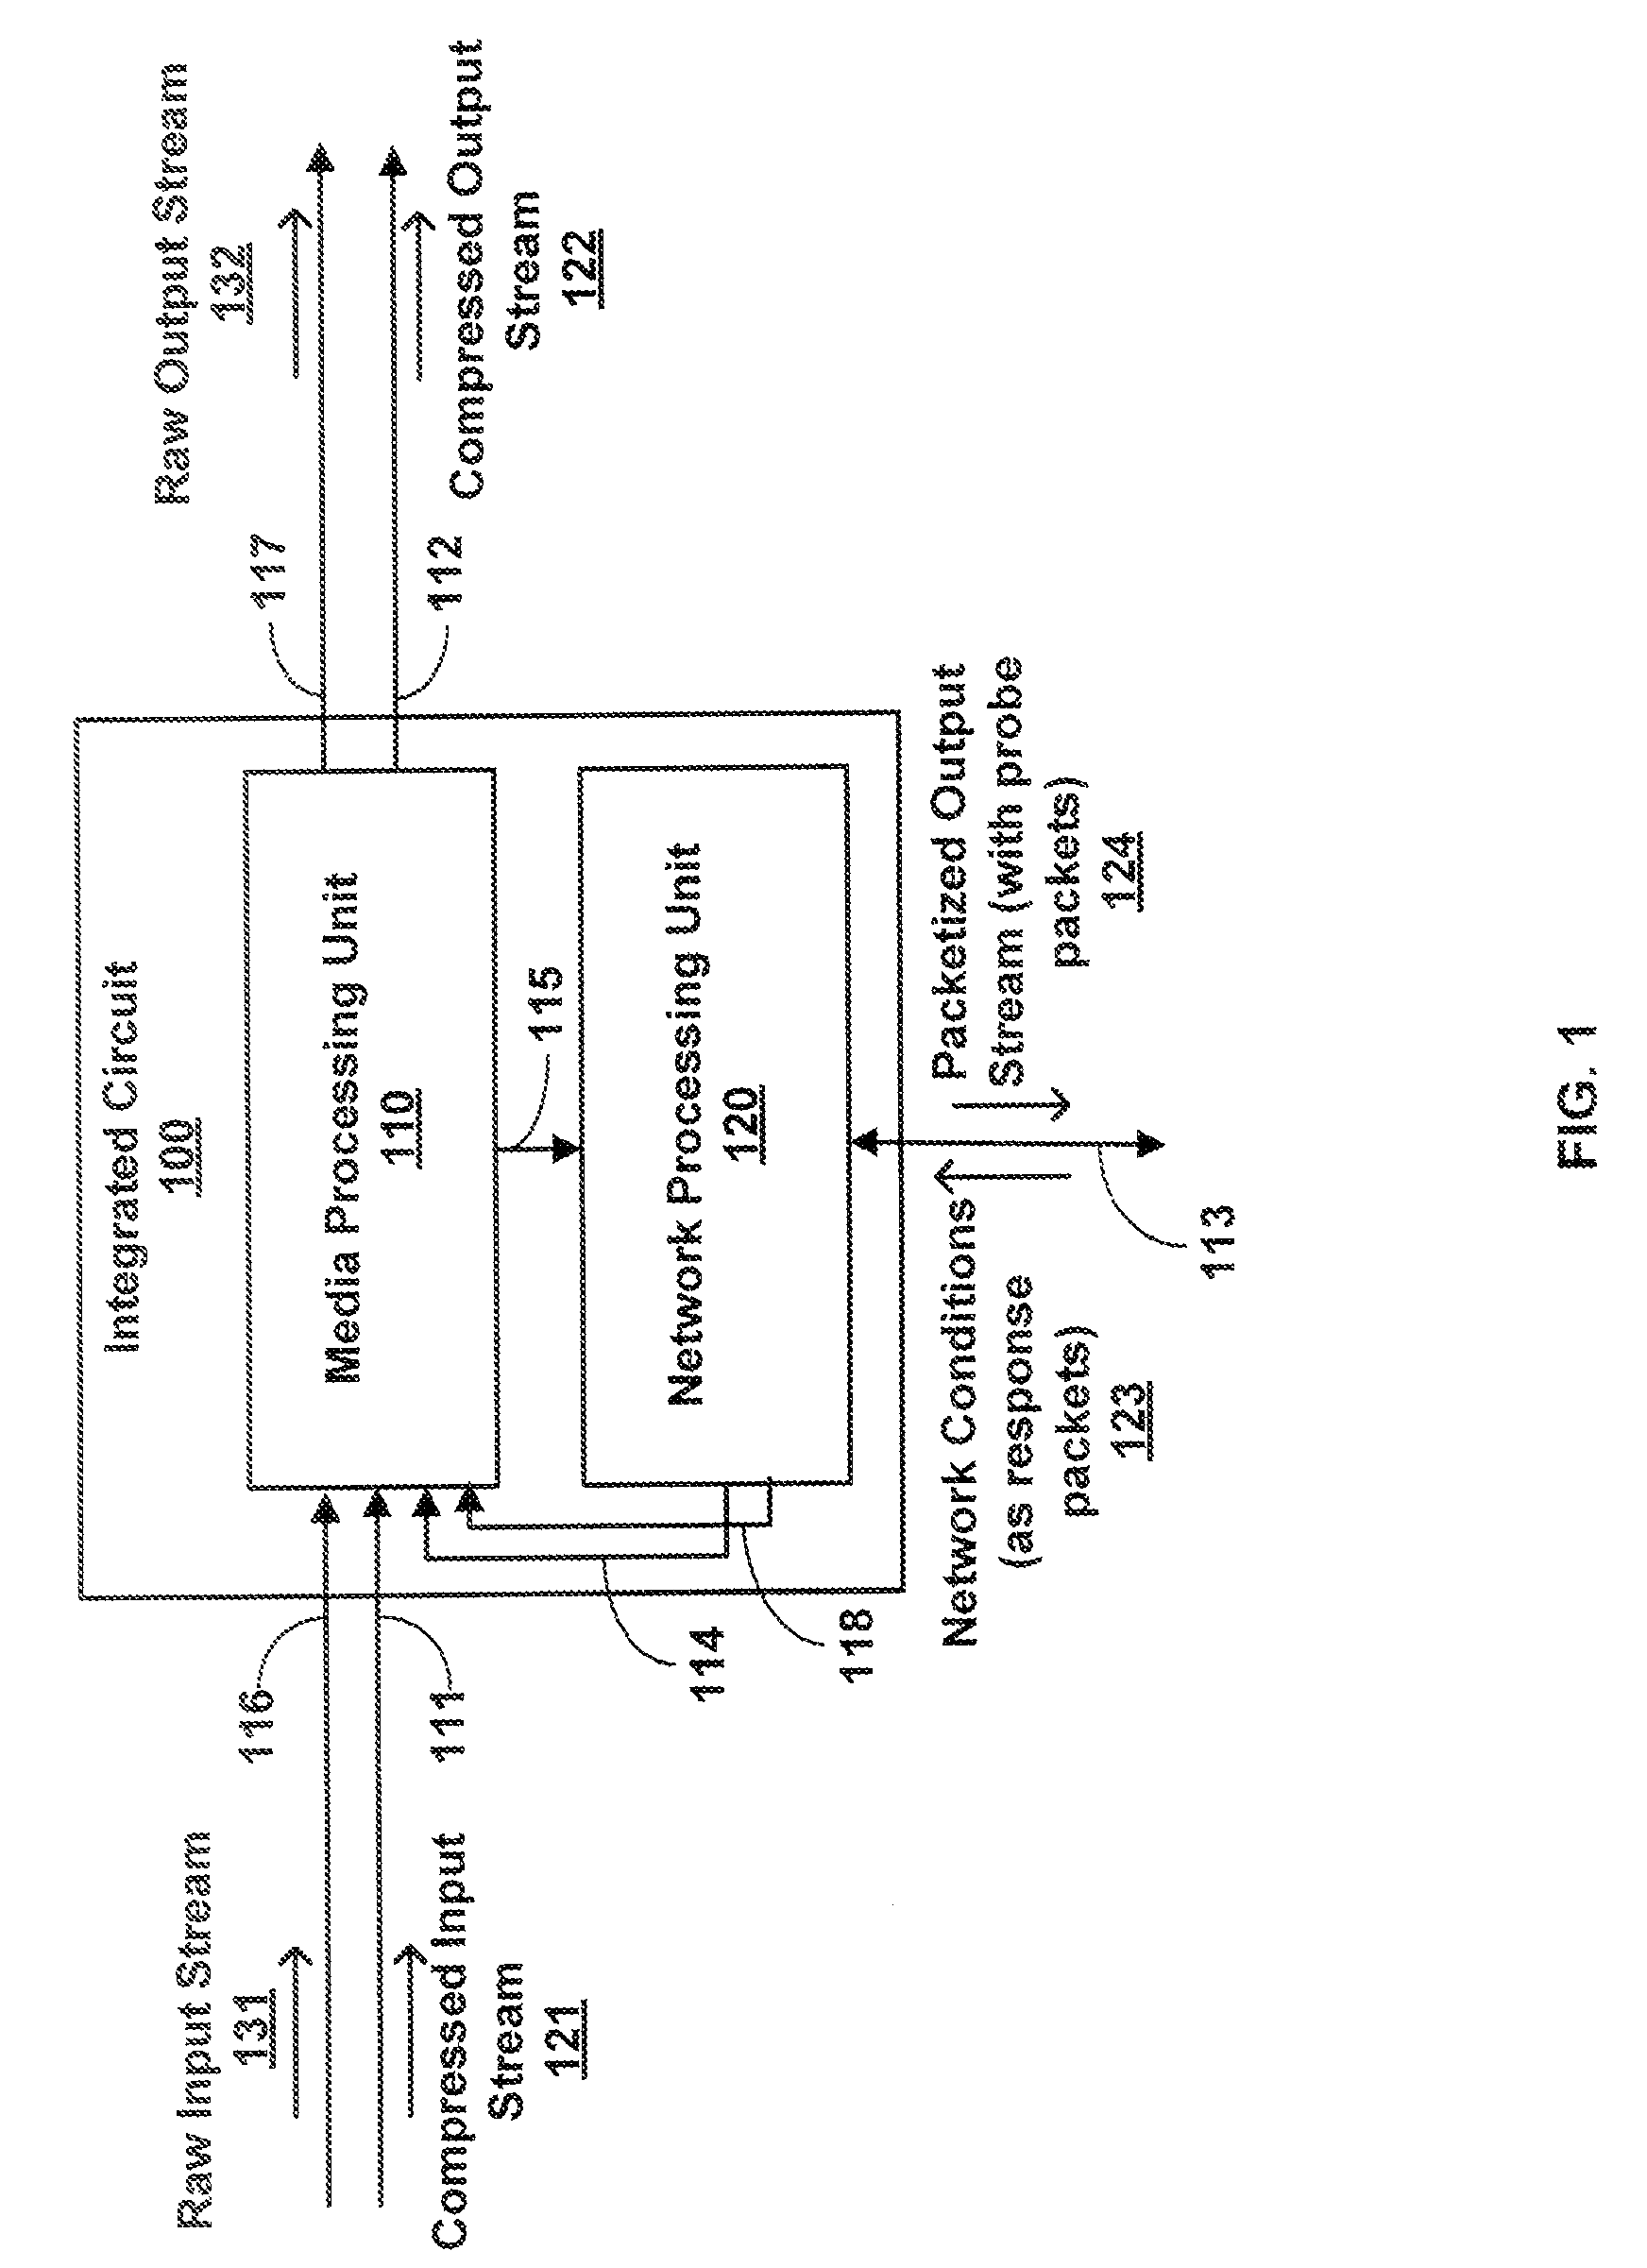 Architecture for combining media processing with networking